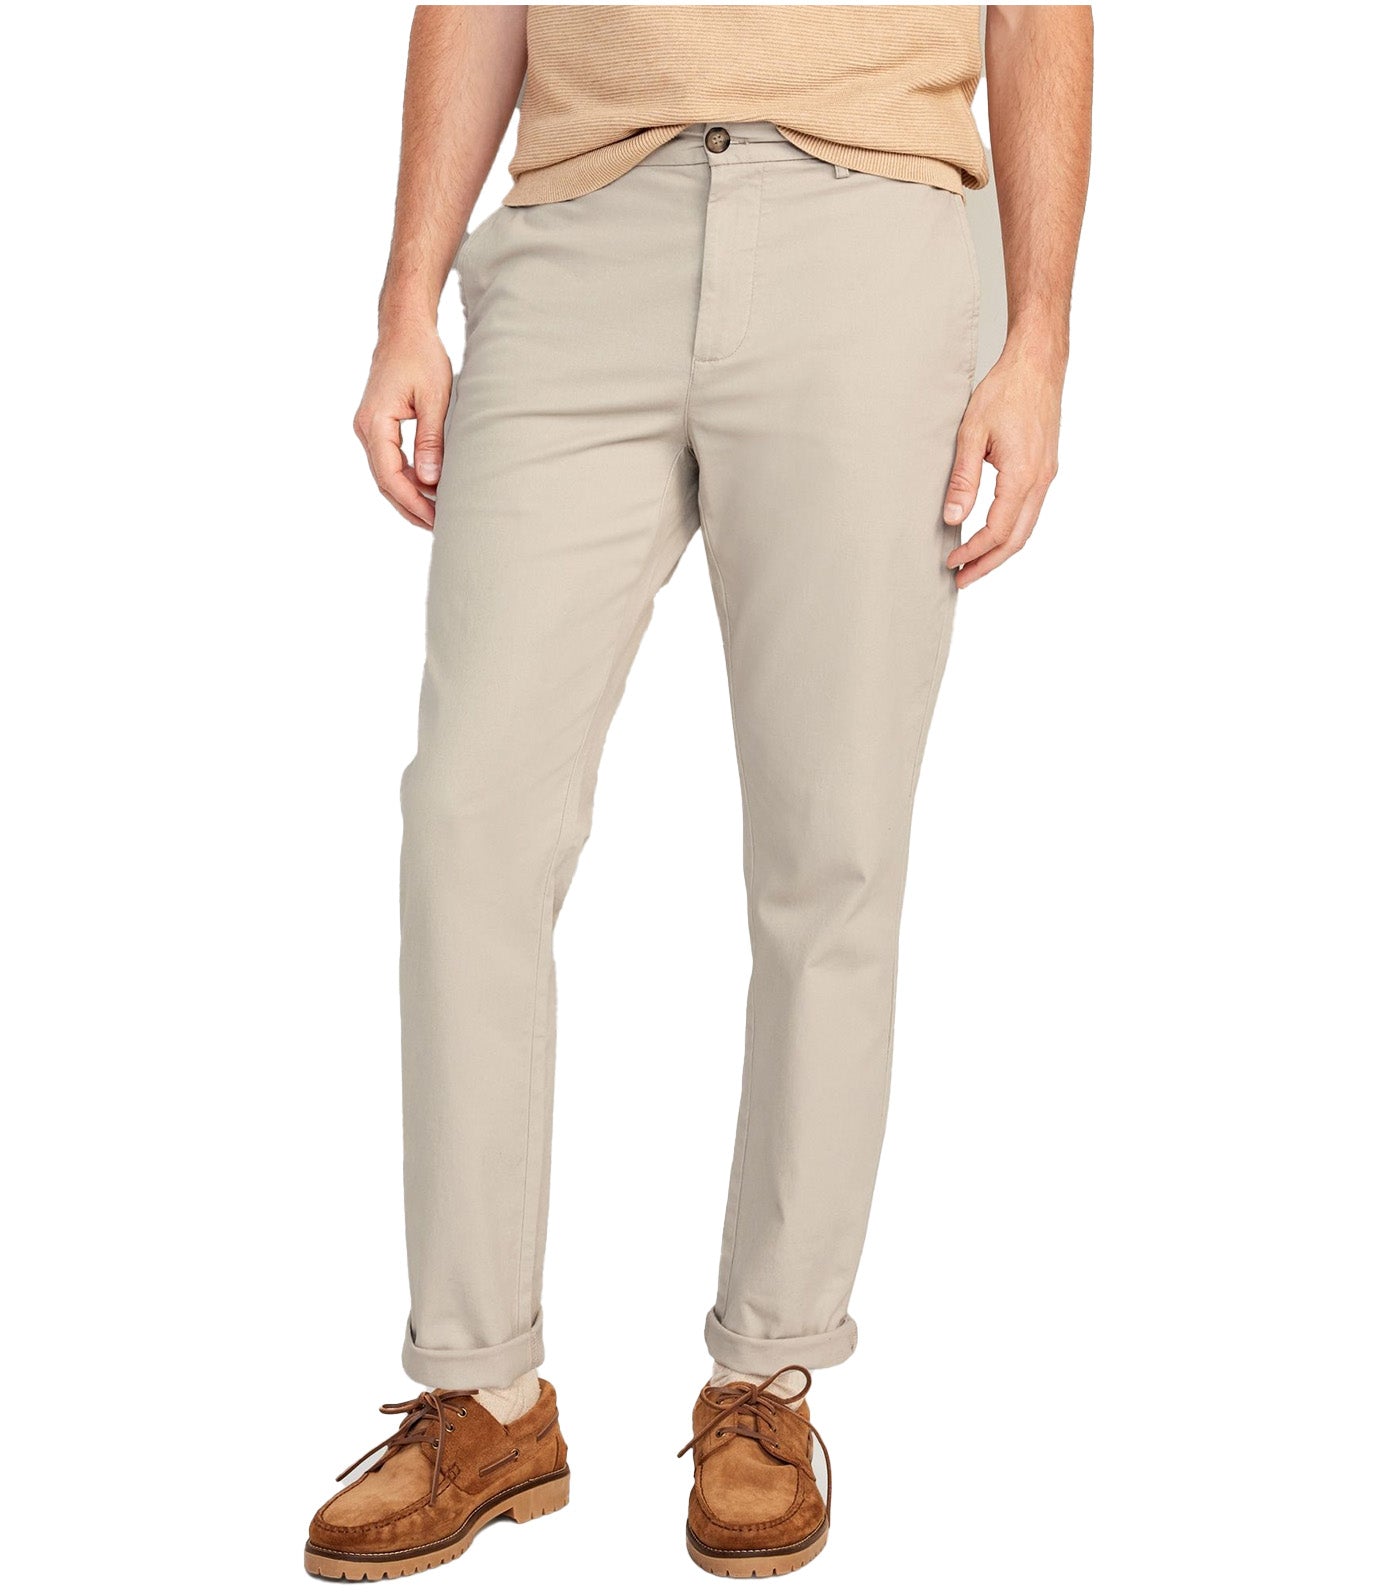 Slim Built-In Flex Rotation Chino Pants for Men A Stones Throw